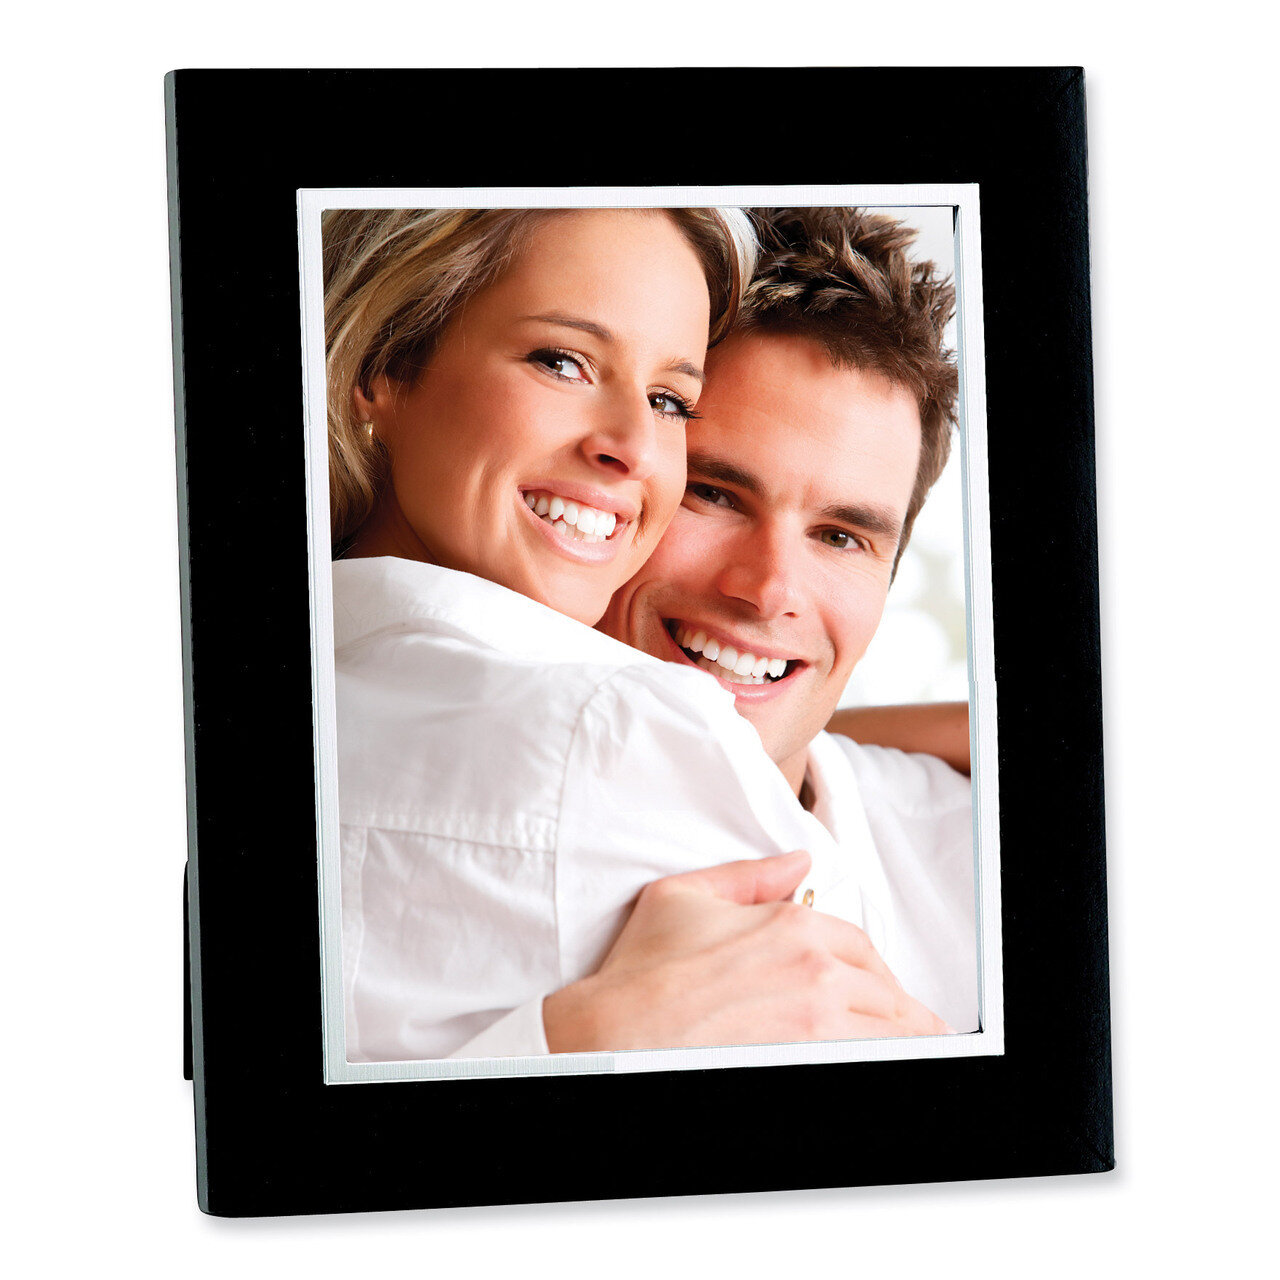 Wood with Silver-tone Trim 8 x 10 Inch Picture Frame GM4301